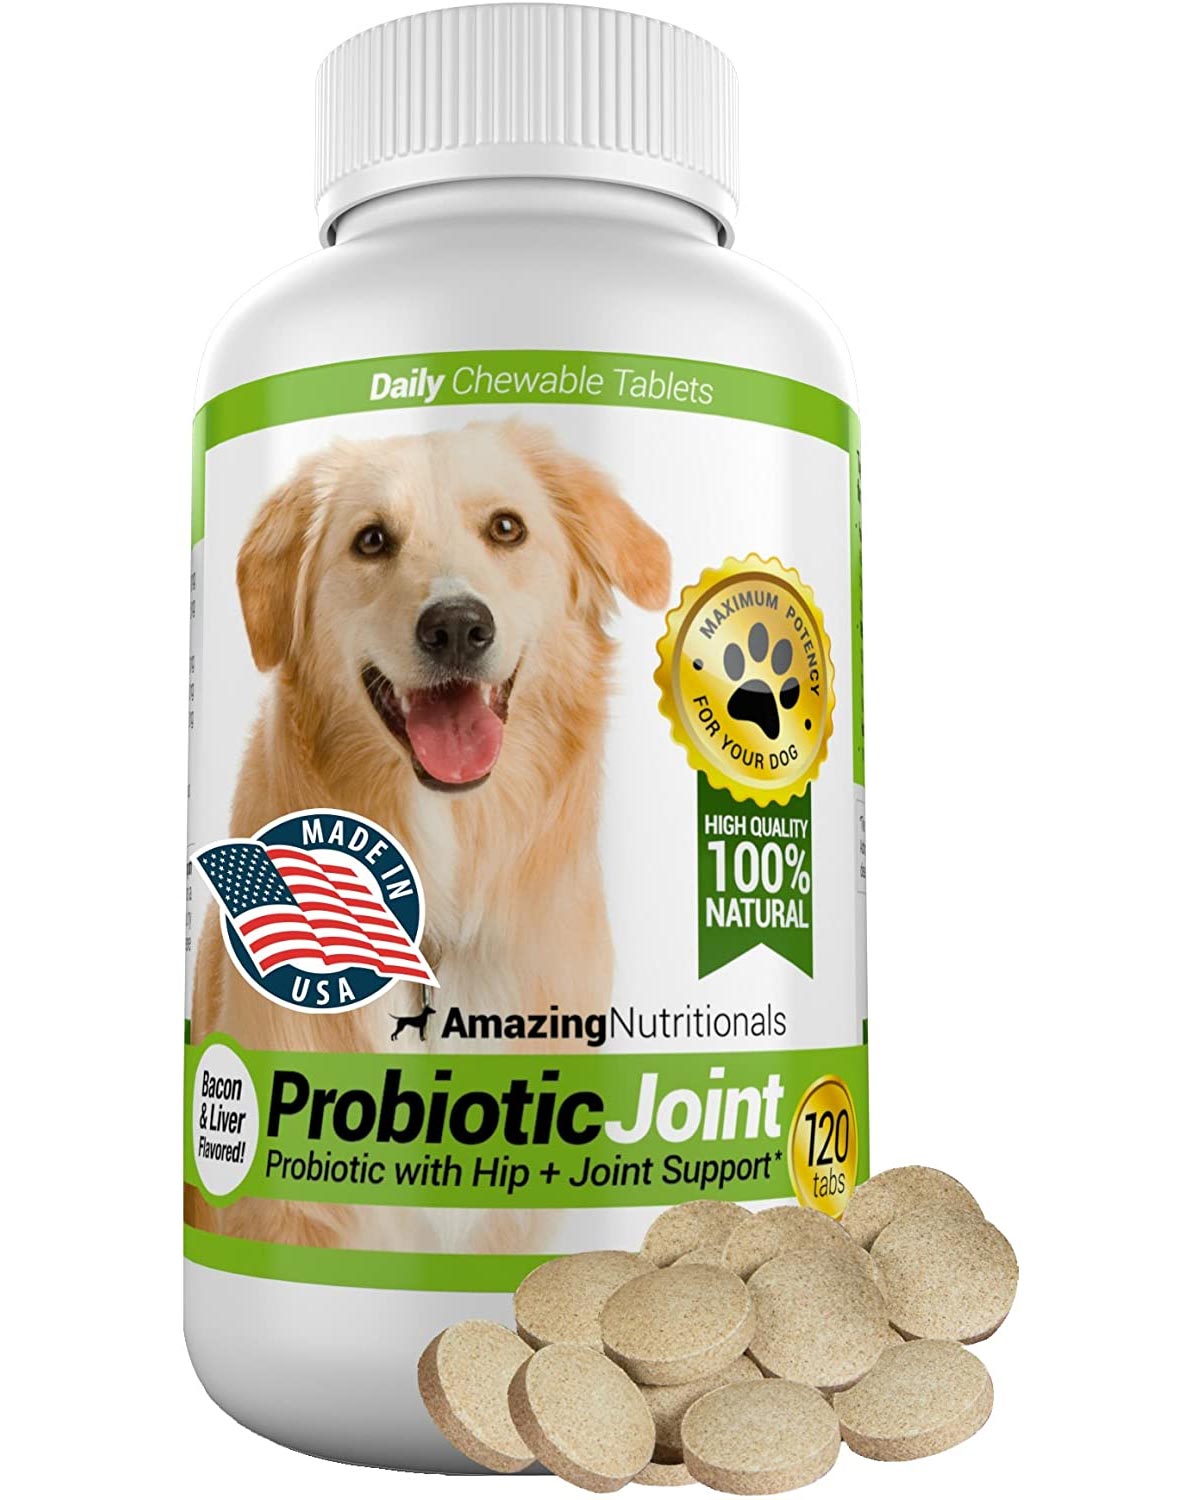 Amazing-Nutritionals-Probiotic-with-Hip-and-Joint-Support